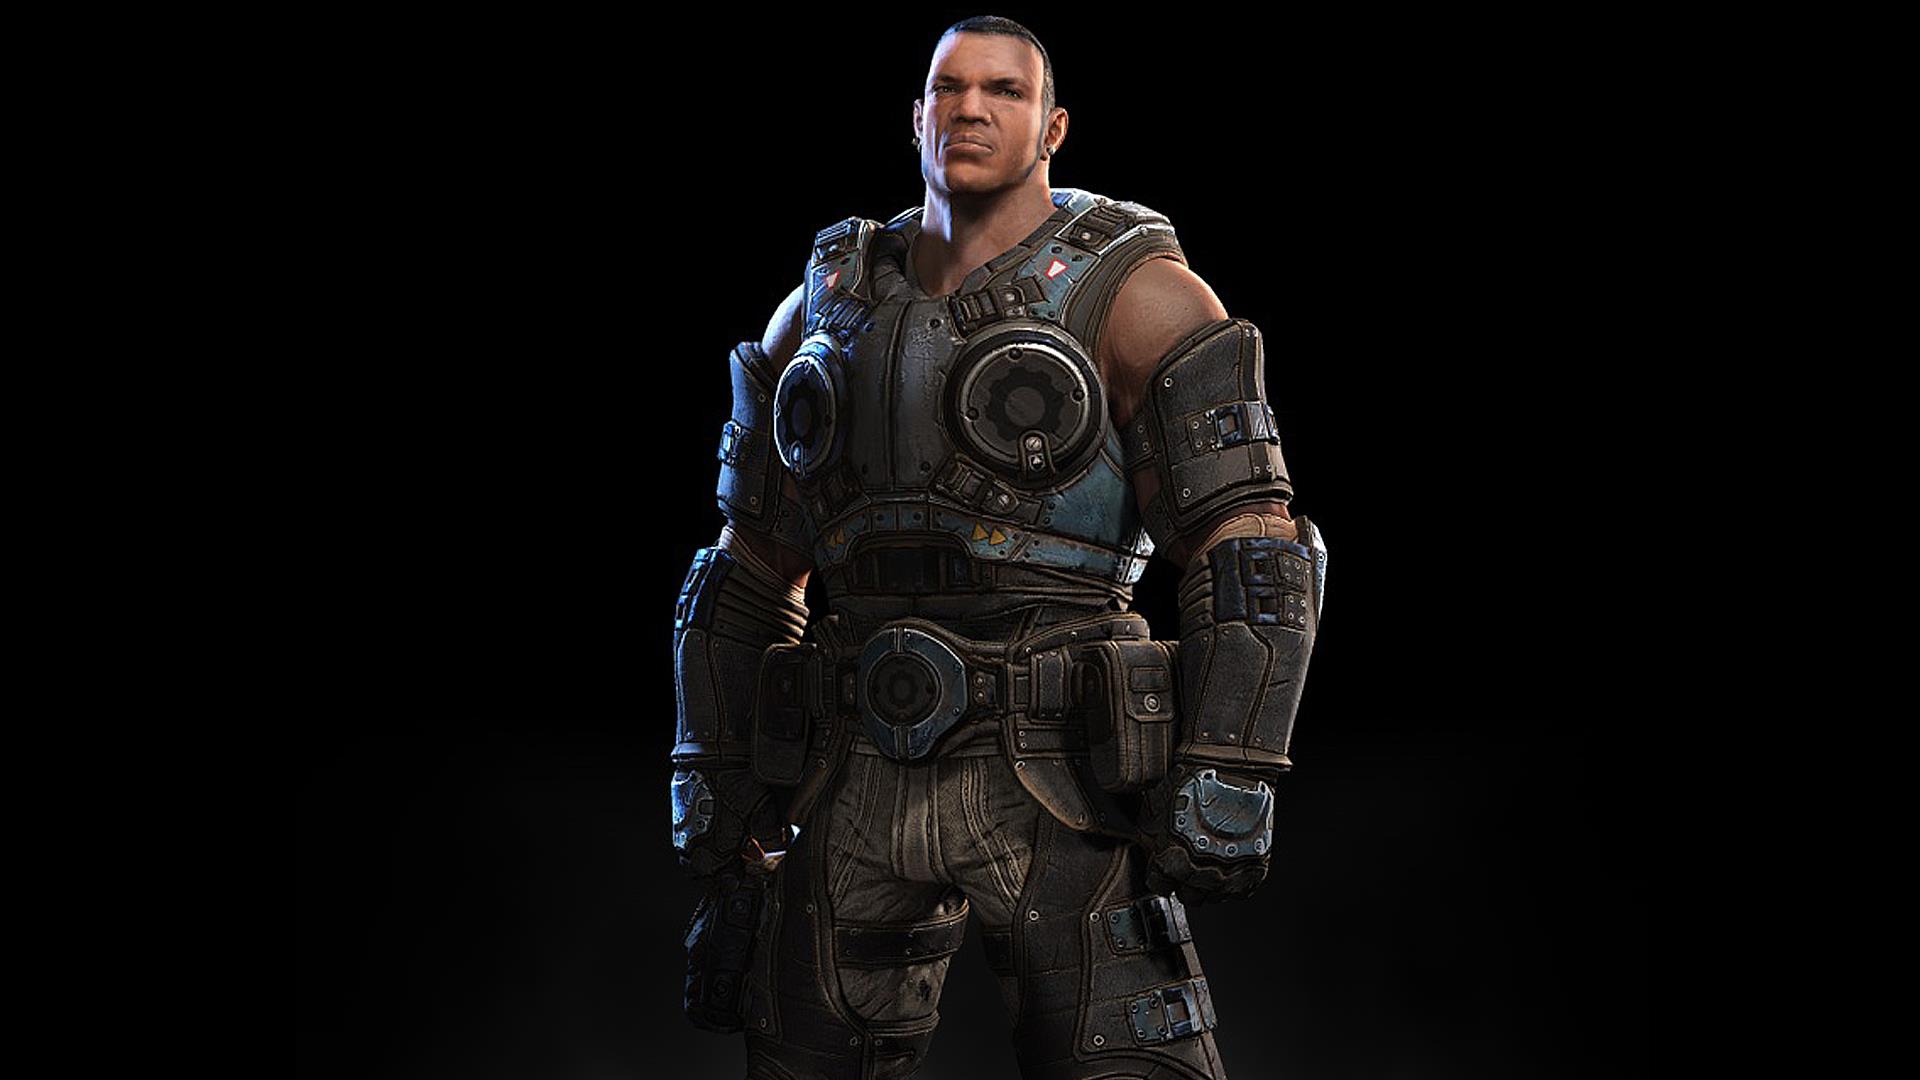 Video Game Gears Of War Judgment 1920x1080